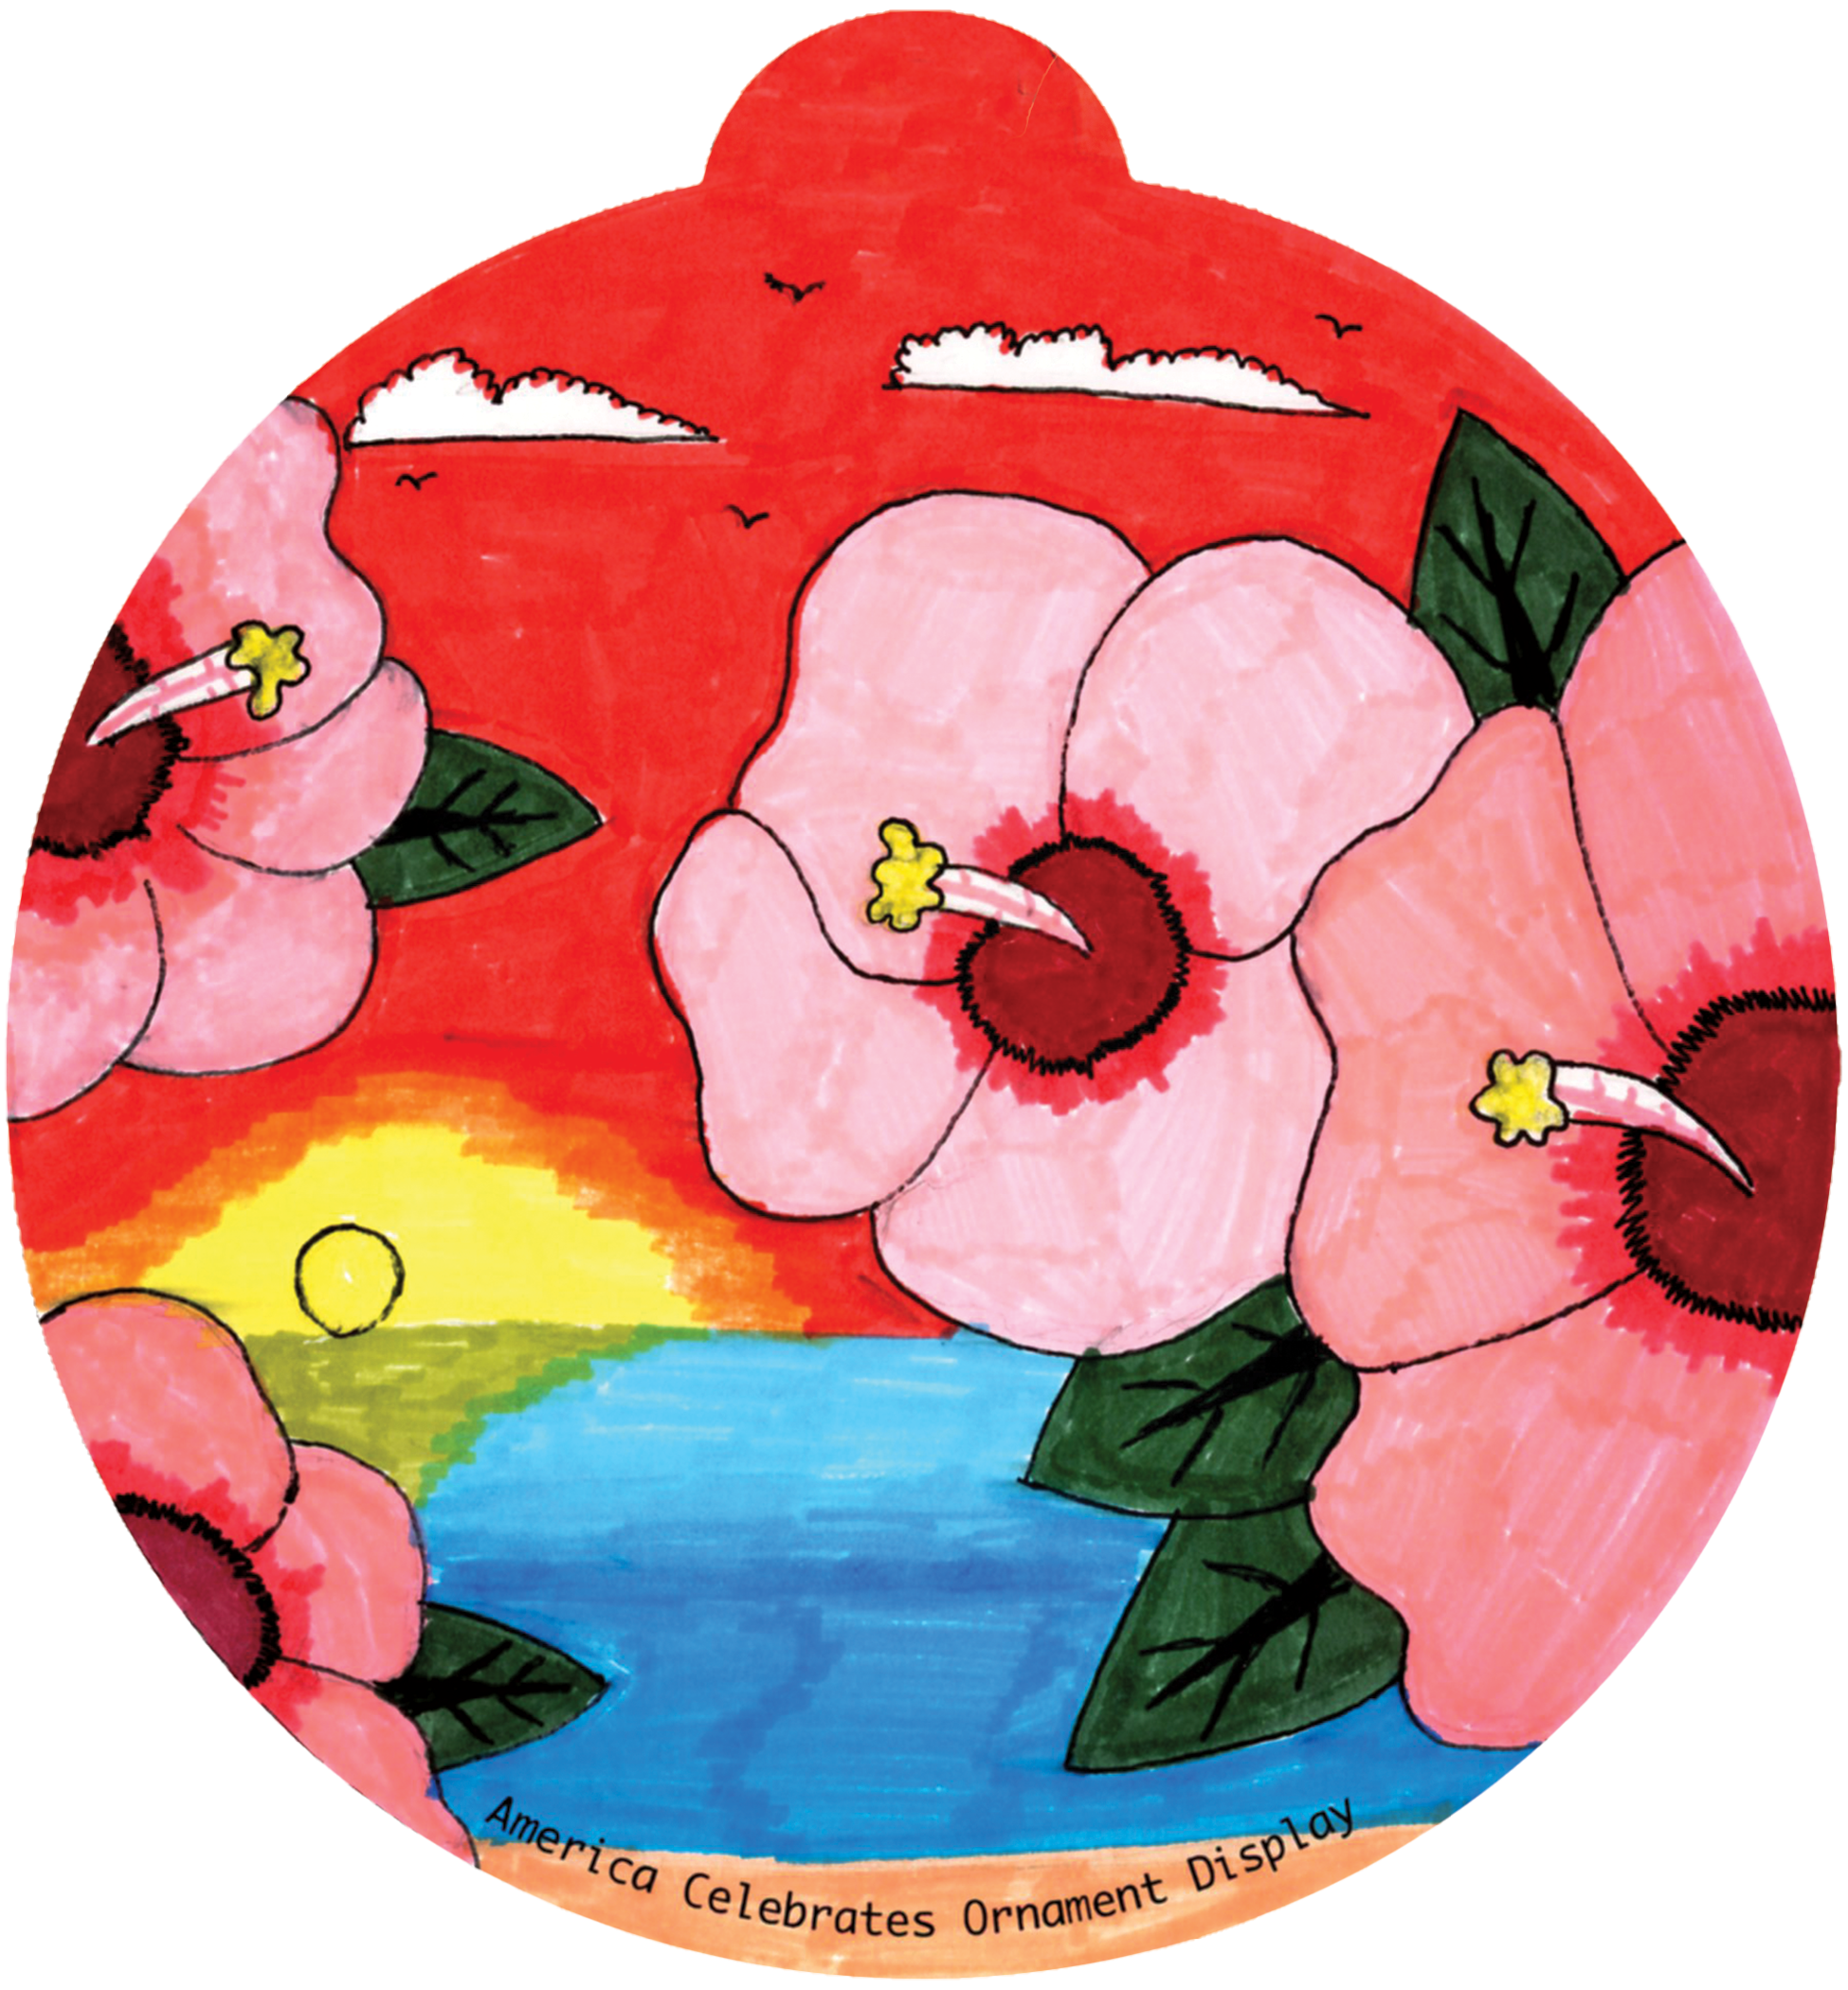 ornament depicting hibiscus flowers at sunset